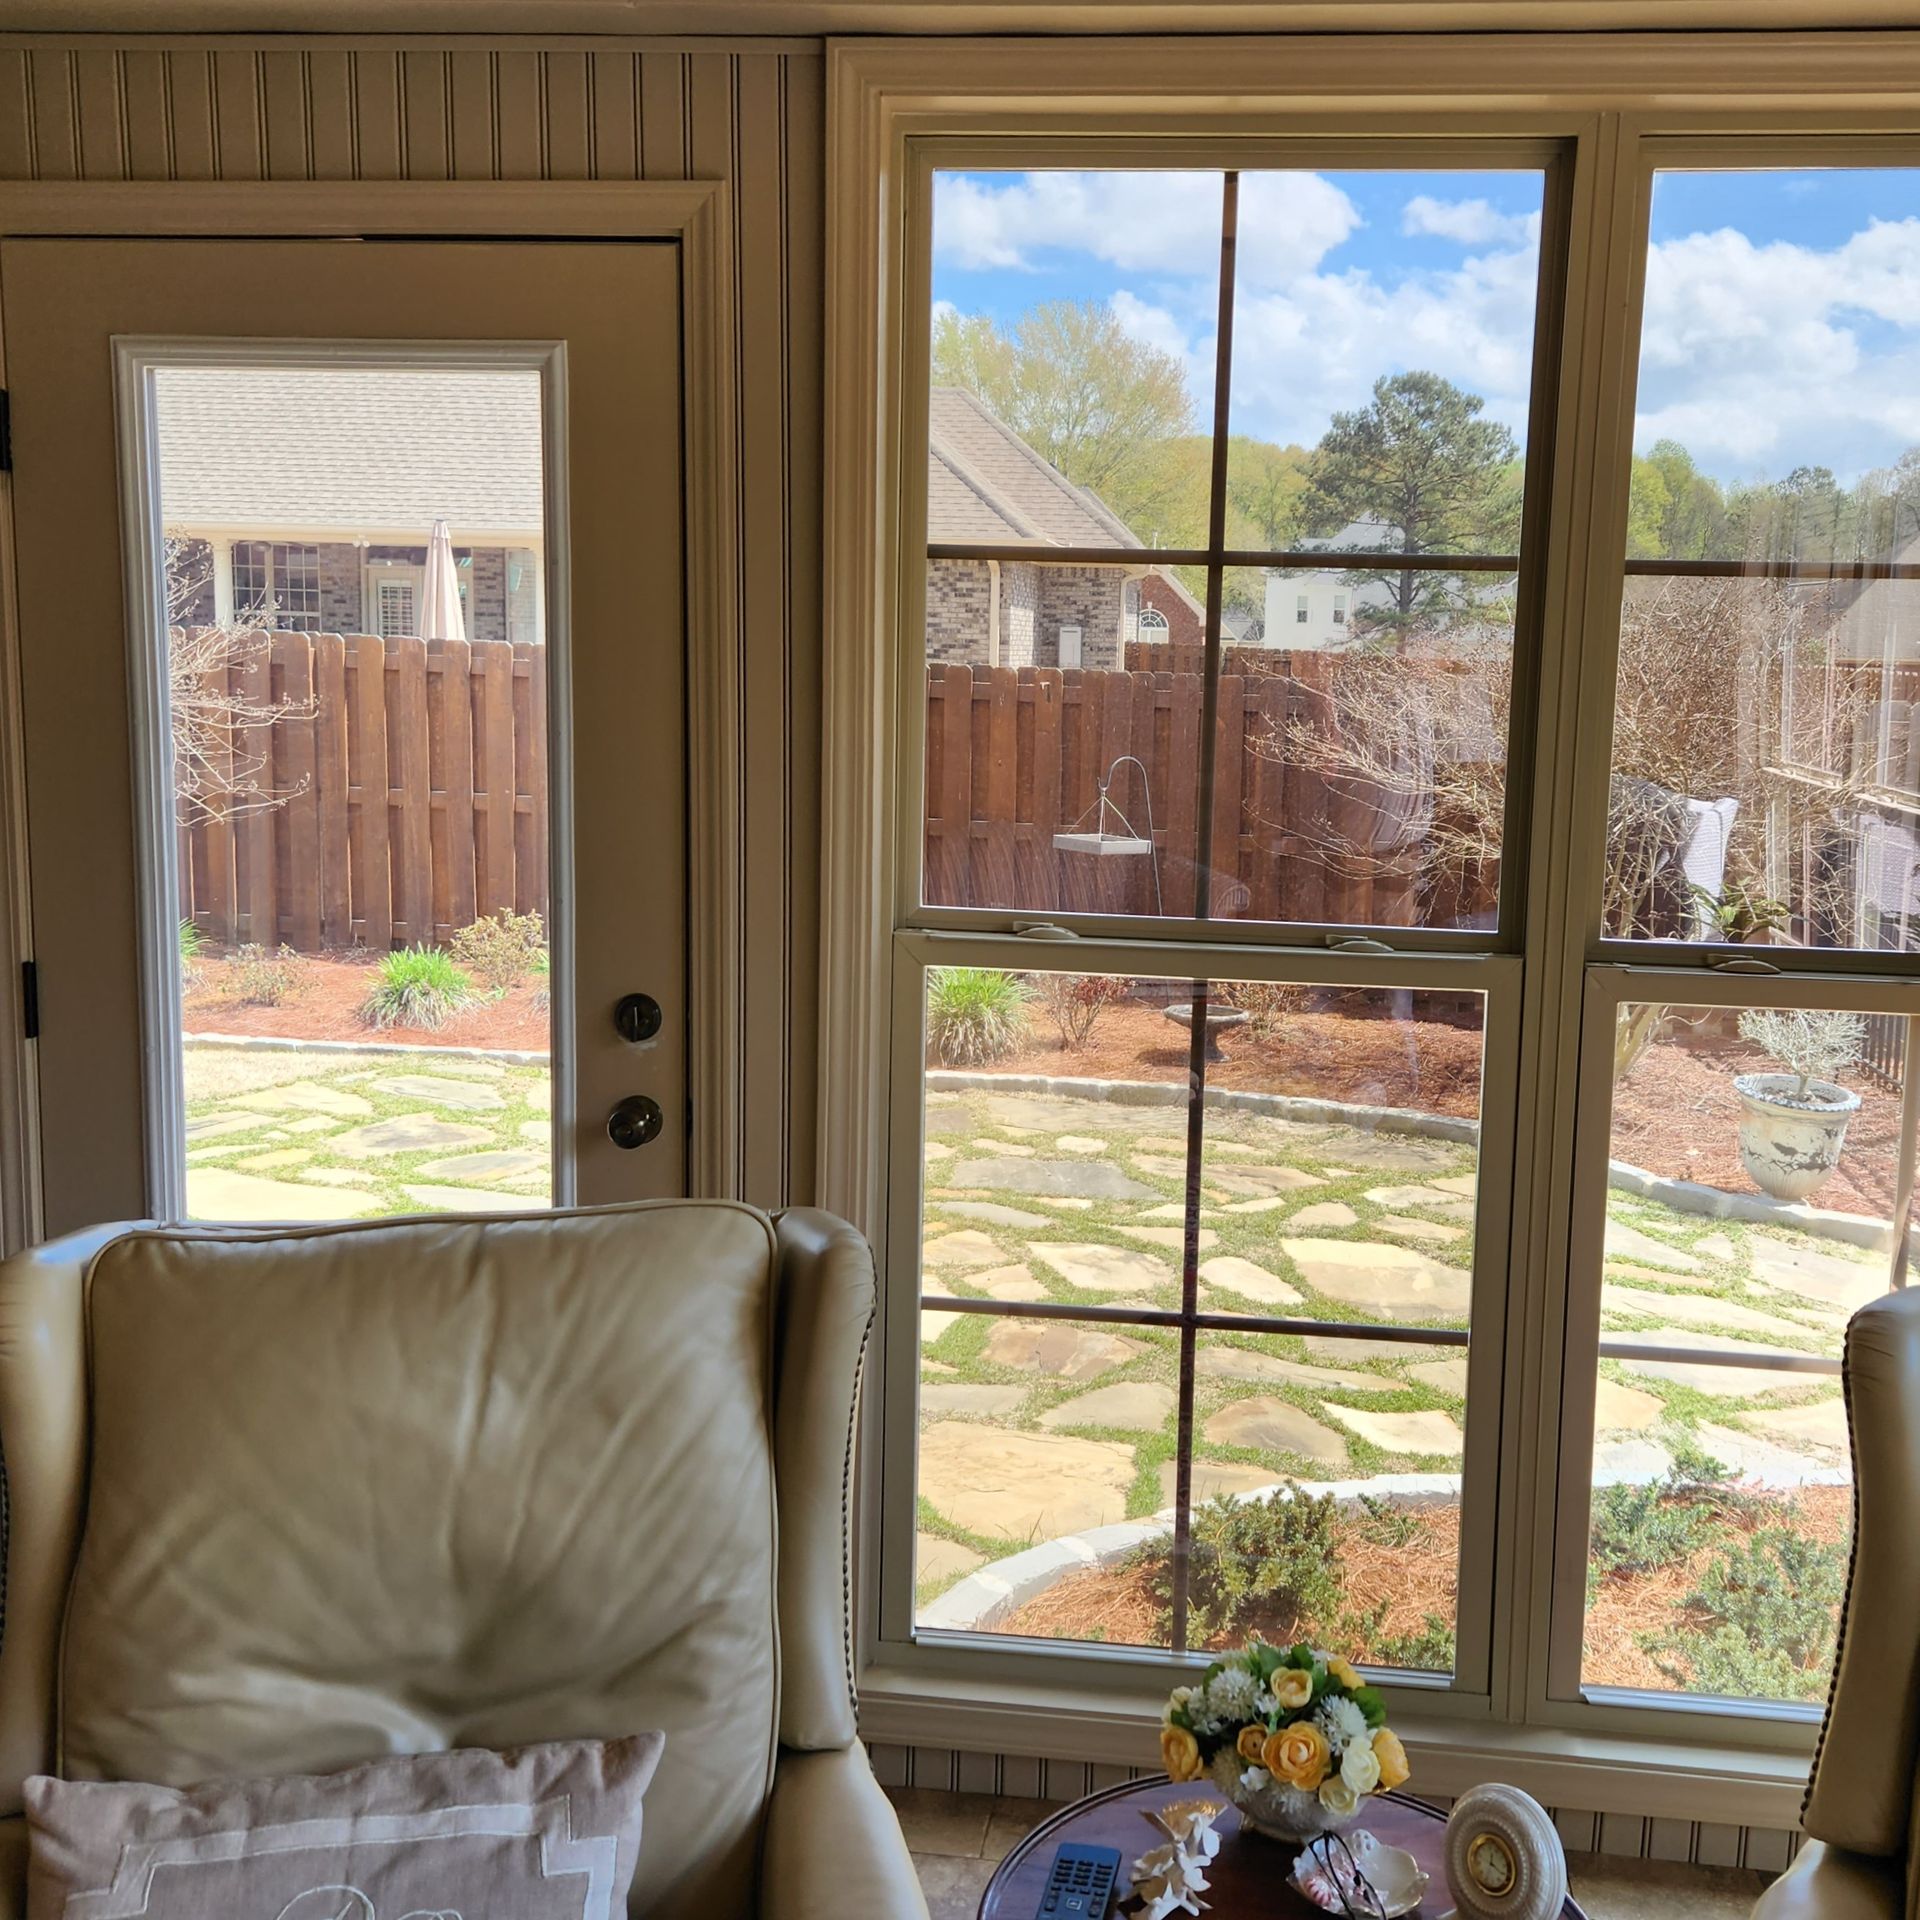 home tinting Prattville - Contrasting Sun Glare seen before last window and glass door are treated with SPF Tint in Prattville AL